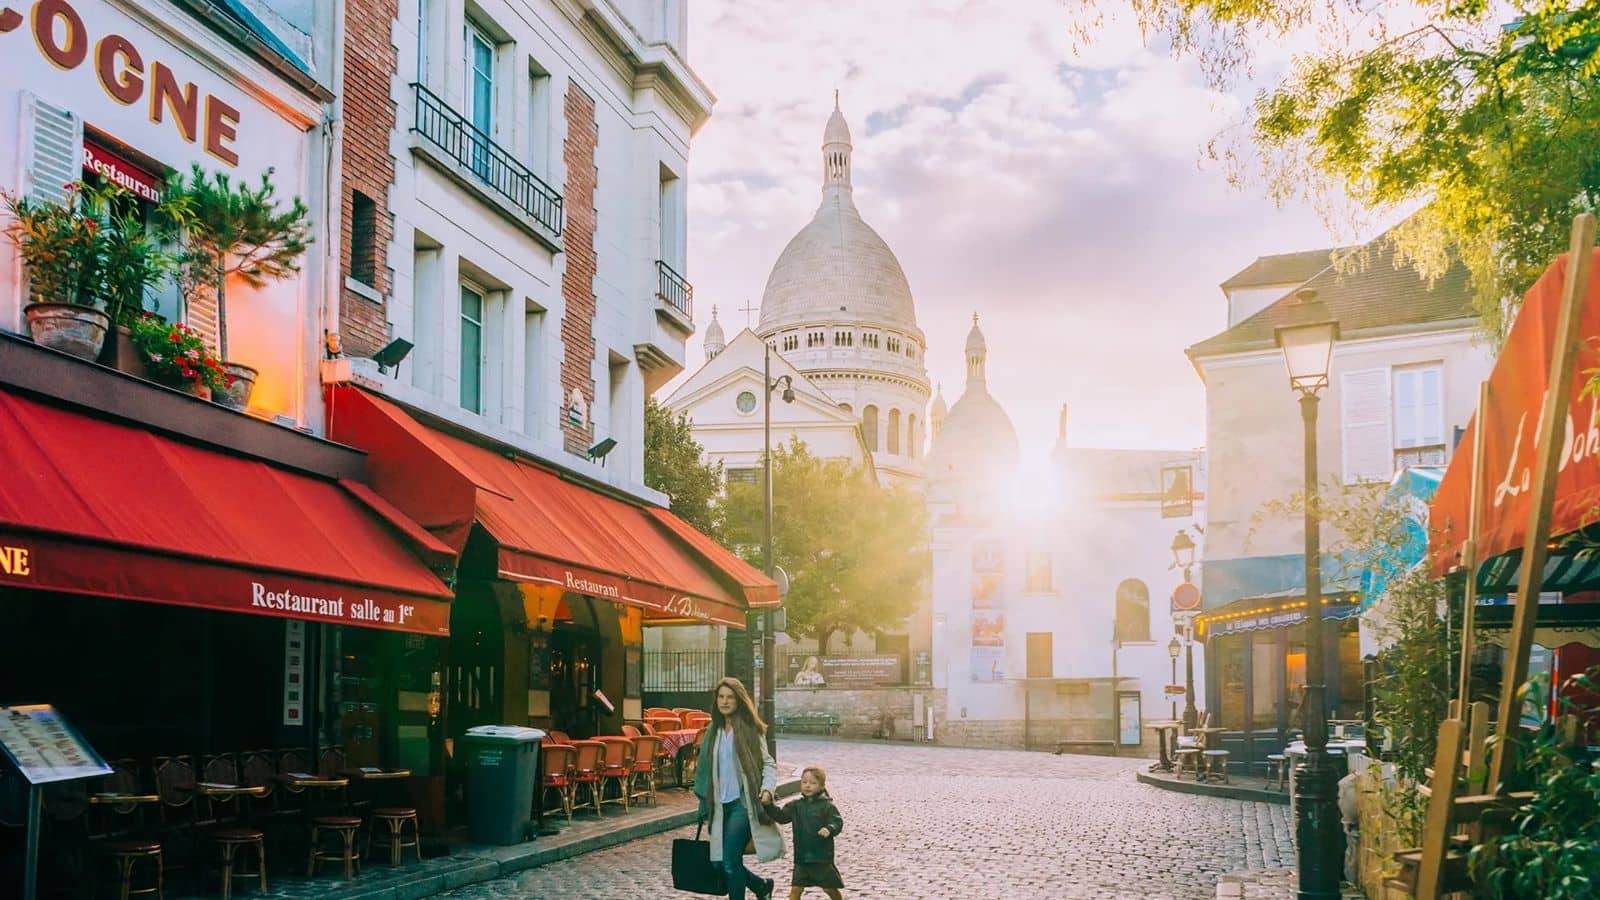 Visit these lesser-known gems in Paris if you haven't already